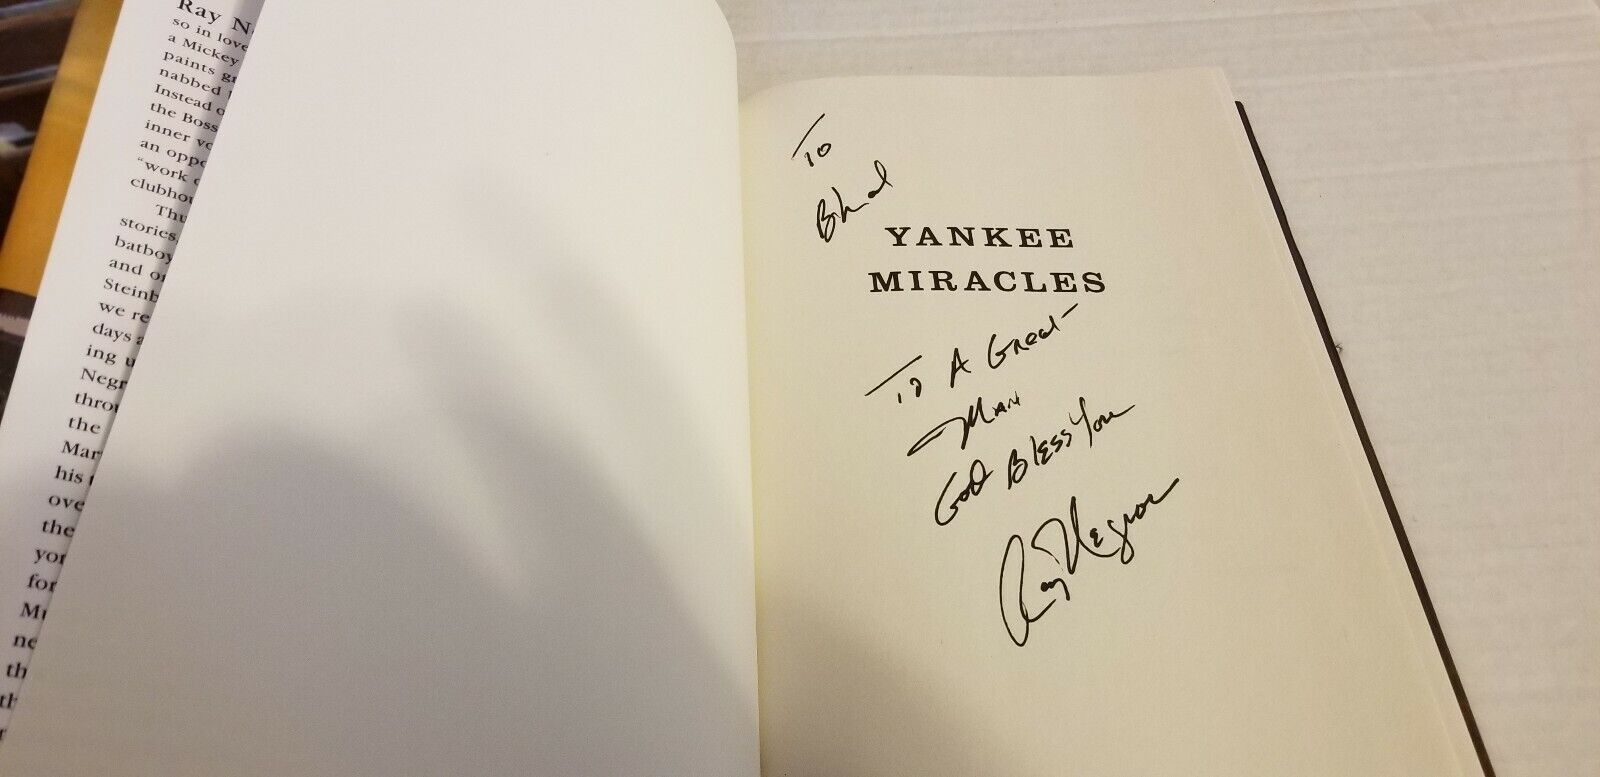 RAY NEGRON BASEBALL LEGEND SIGNED AUTOGRAPHED YANKEES MIRACLES BOOK INSCRIBED 